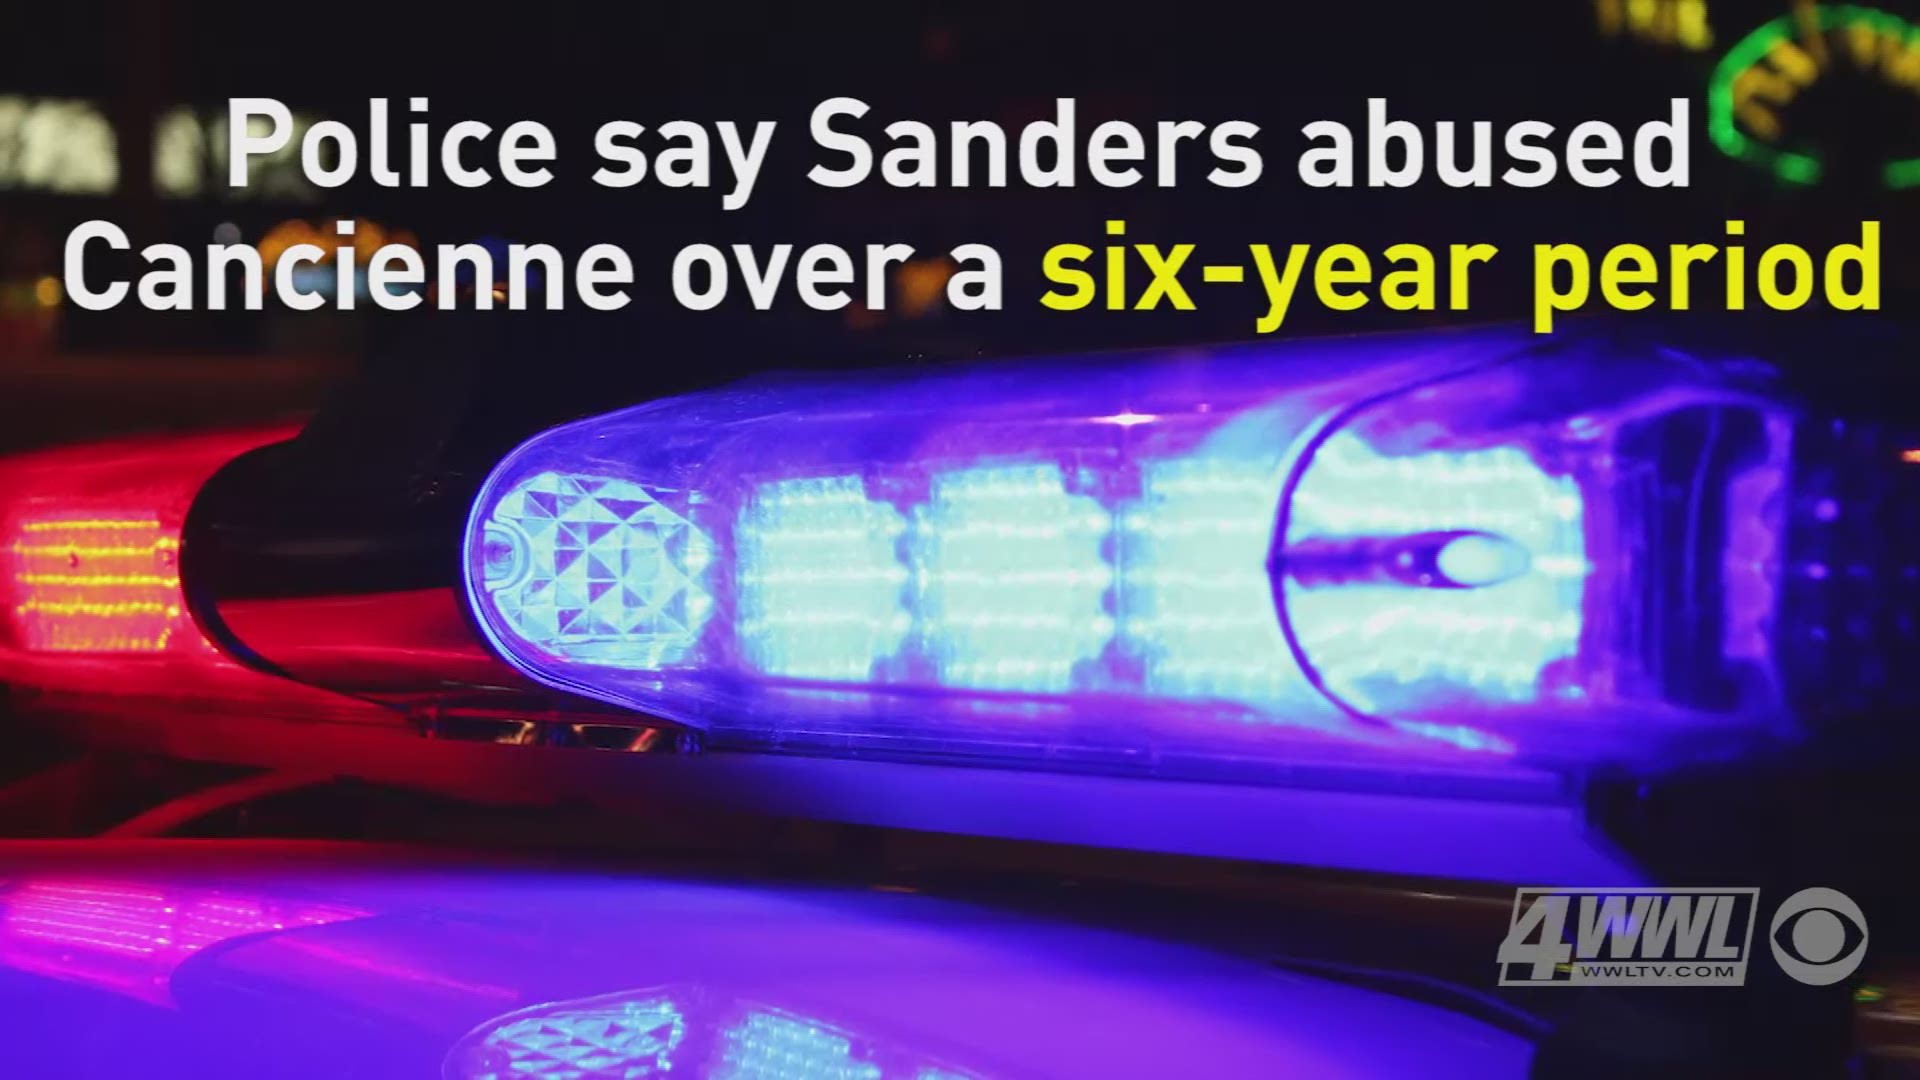 McGregor said that an investigation revealed that Cancienne had been abused by Sanders over the past six years and that the beatings had intensified.